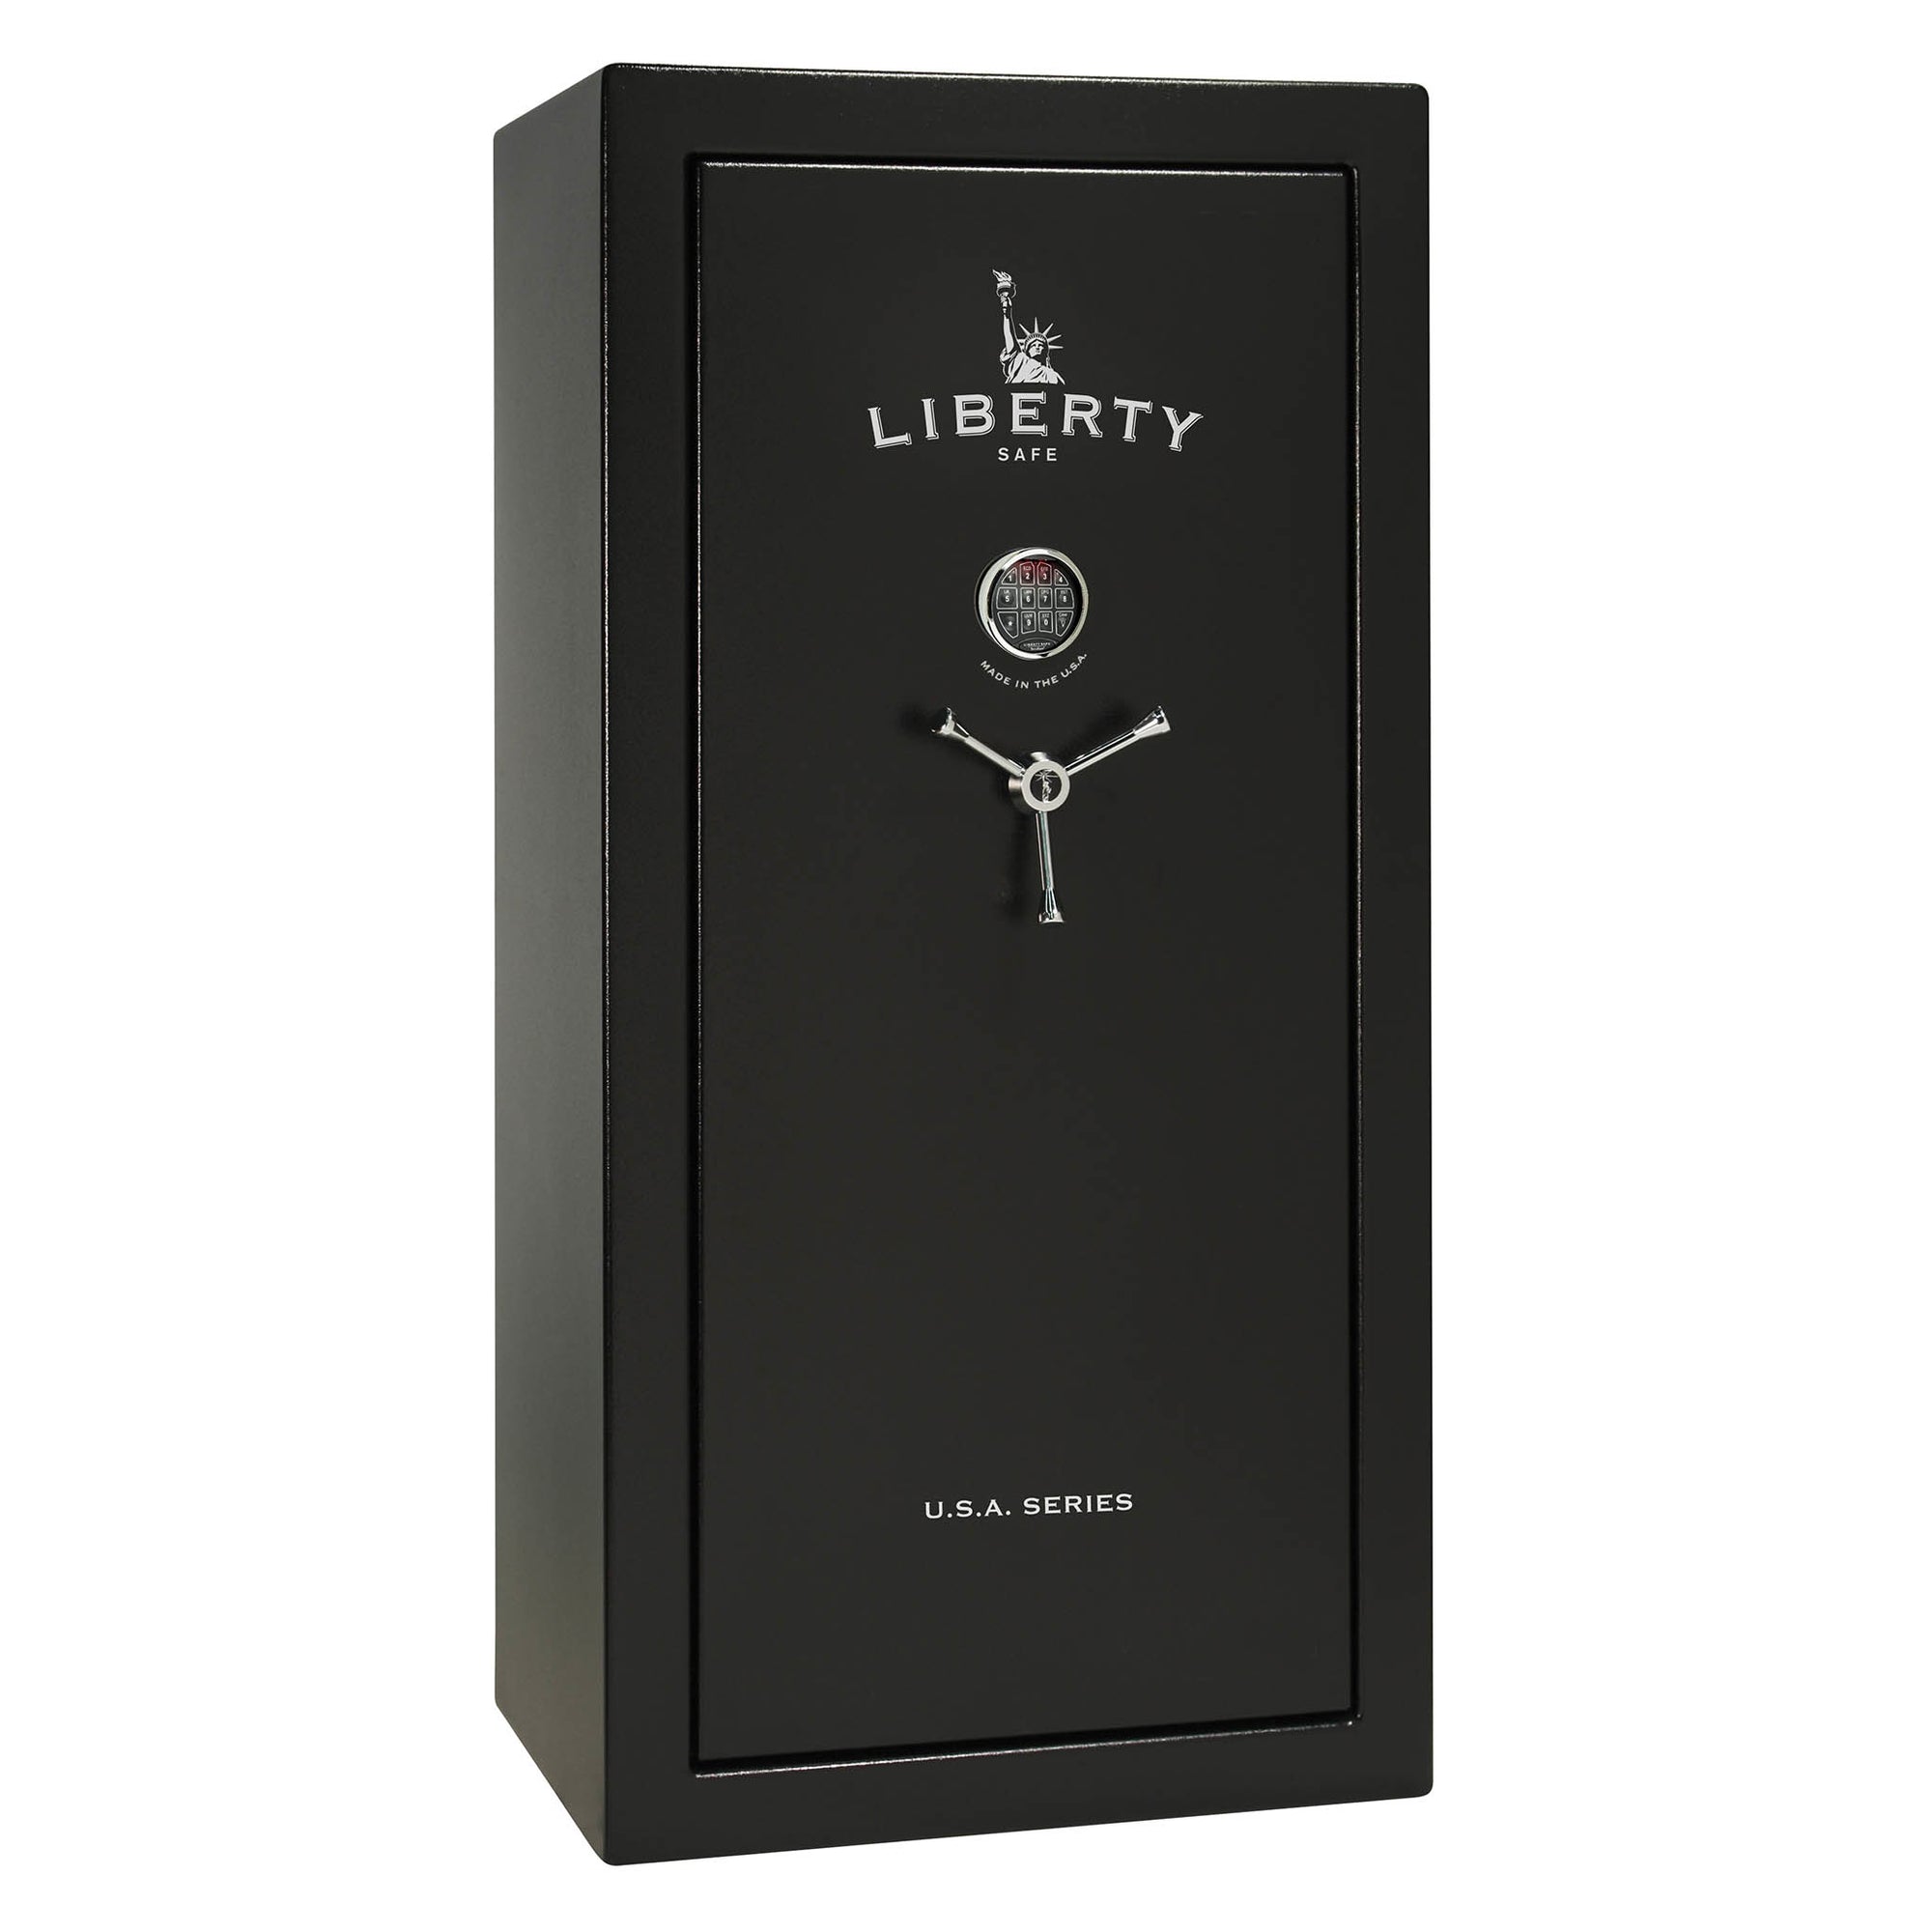 Liberty USA 30 safe in textured black with chrome electronic lock.